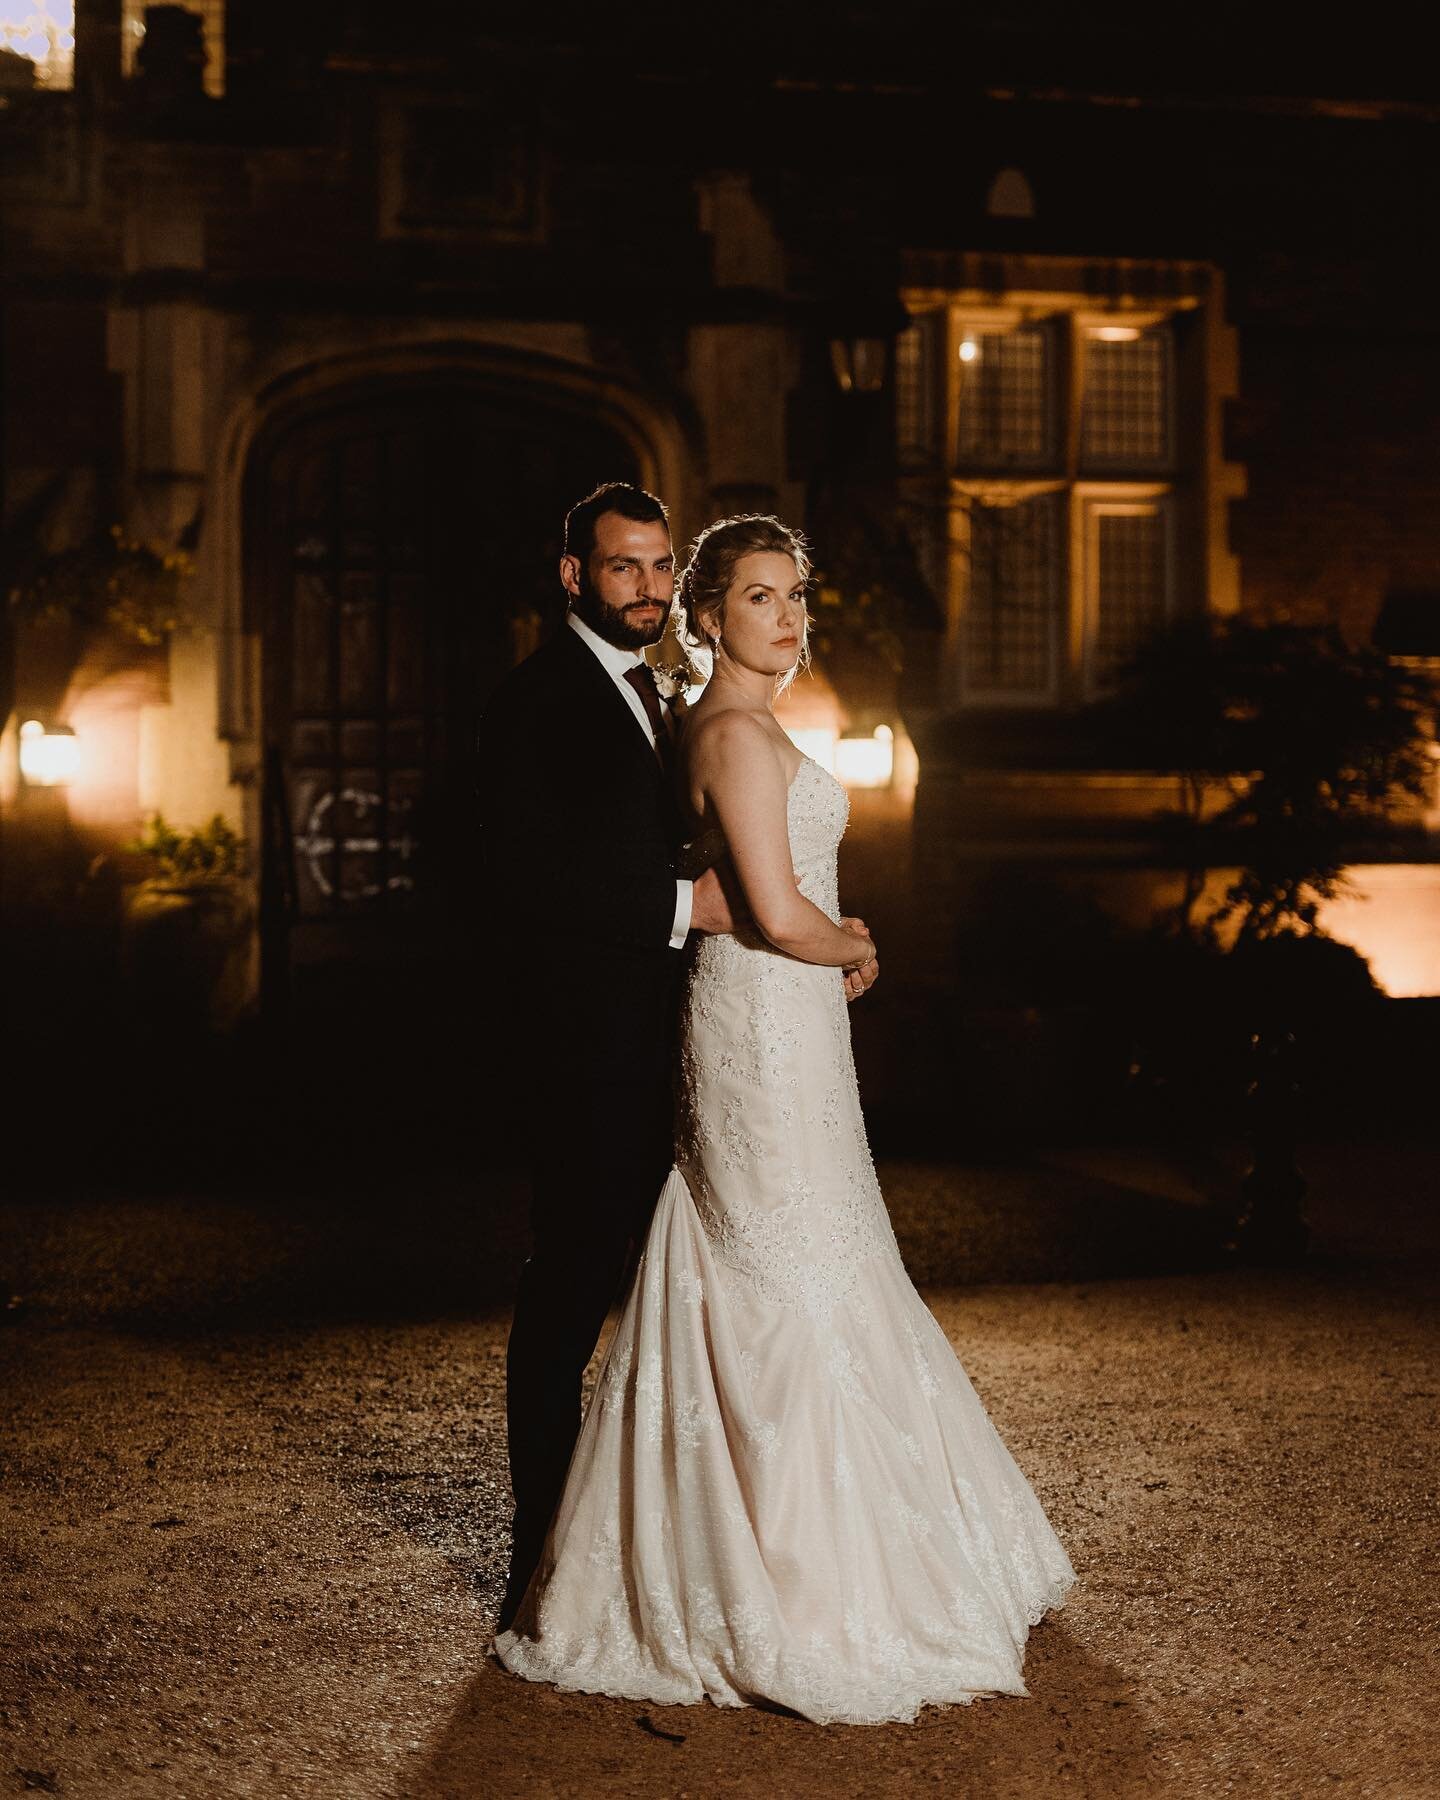 Autumn and Winter brings the night shots ⭐️🌕🌃
 @berwicklodgehotel / @berwicklodge providing the perfect backdrop for some after dark drama shots 🥰

Throwback to this amazing wedding with @steelandoakco on New Years Eve. Always love working with an